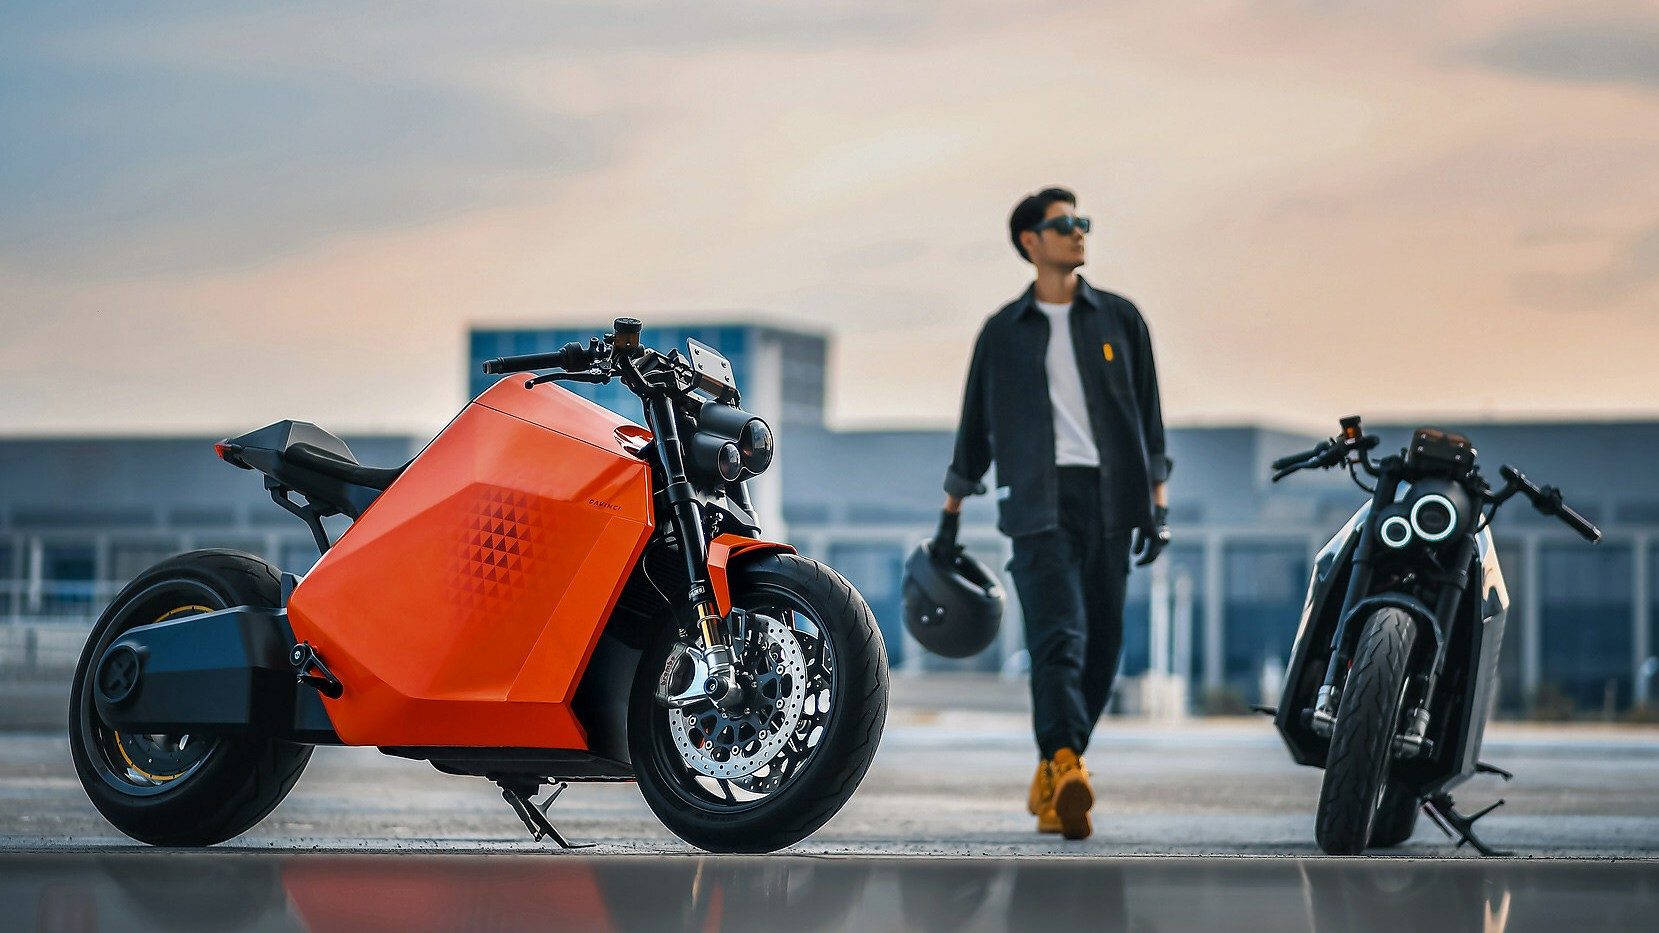 Electric motorcycles, bikes part of mobility wave at CES 2023